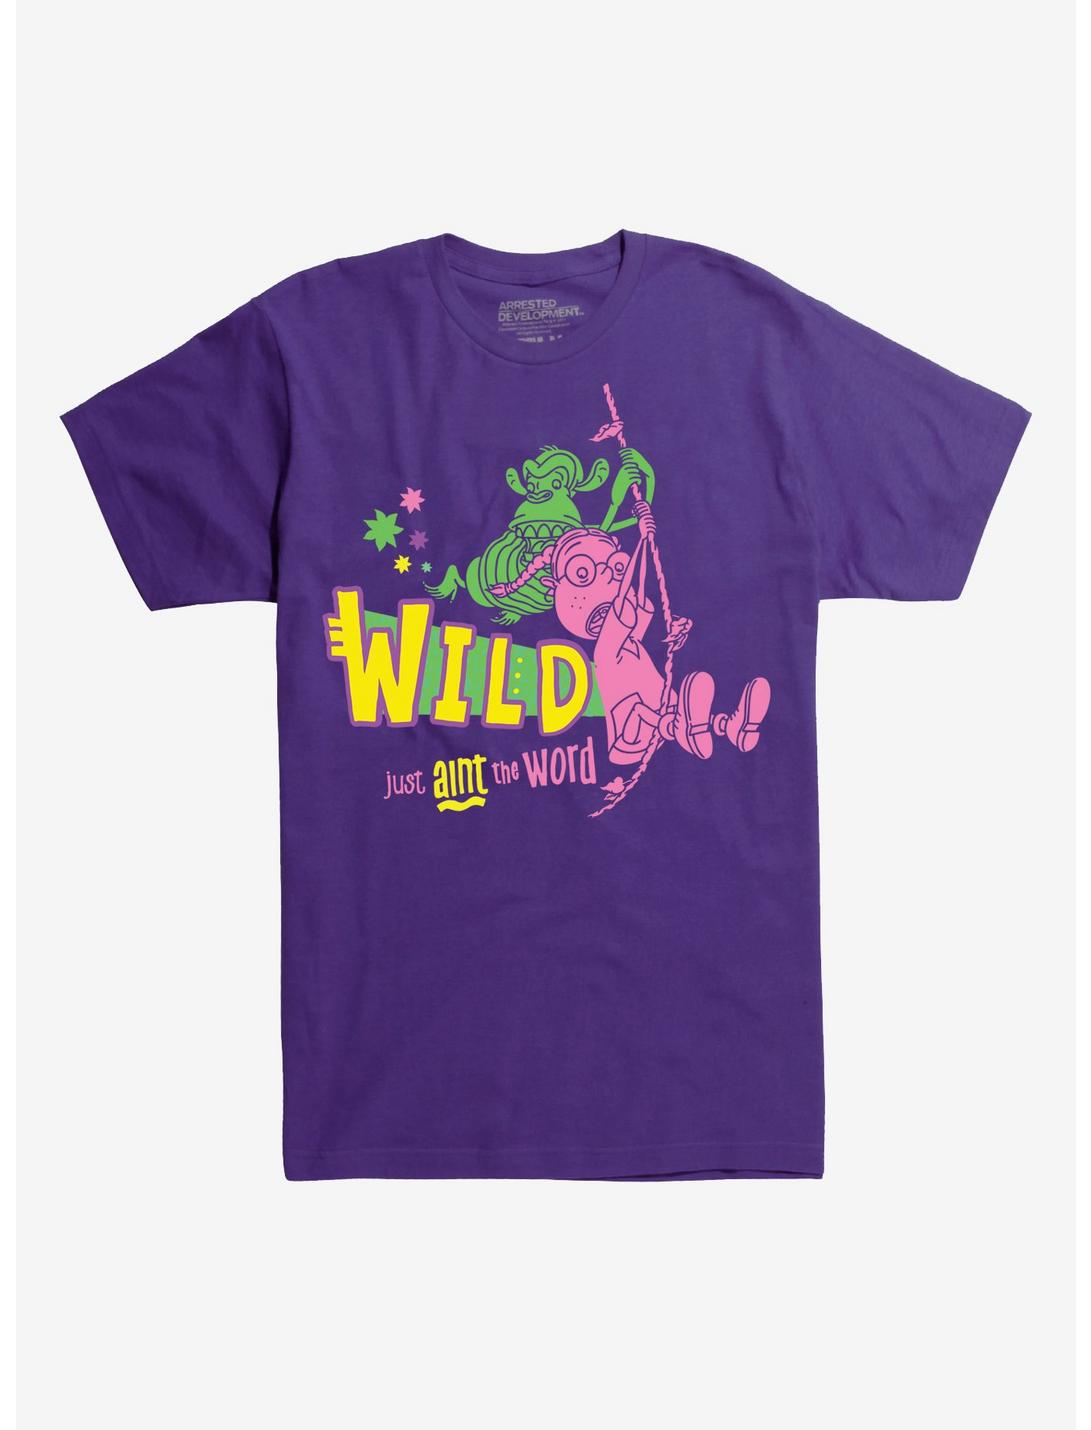 The Wild Thornberry's Wild Just Ain't the Word T-Shirt, PURPLE, hi-res